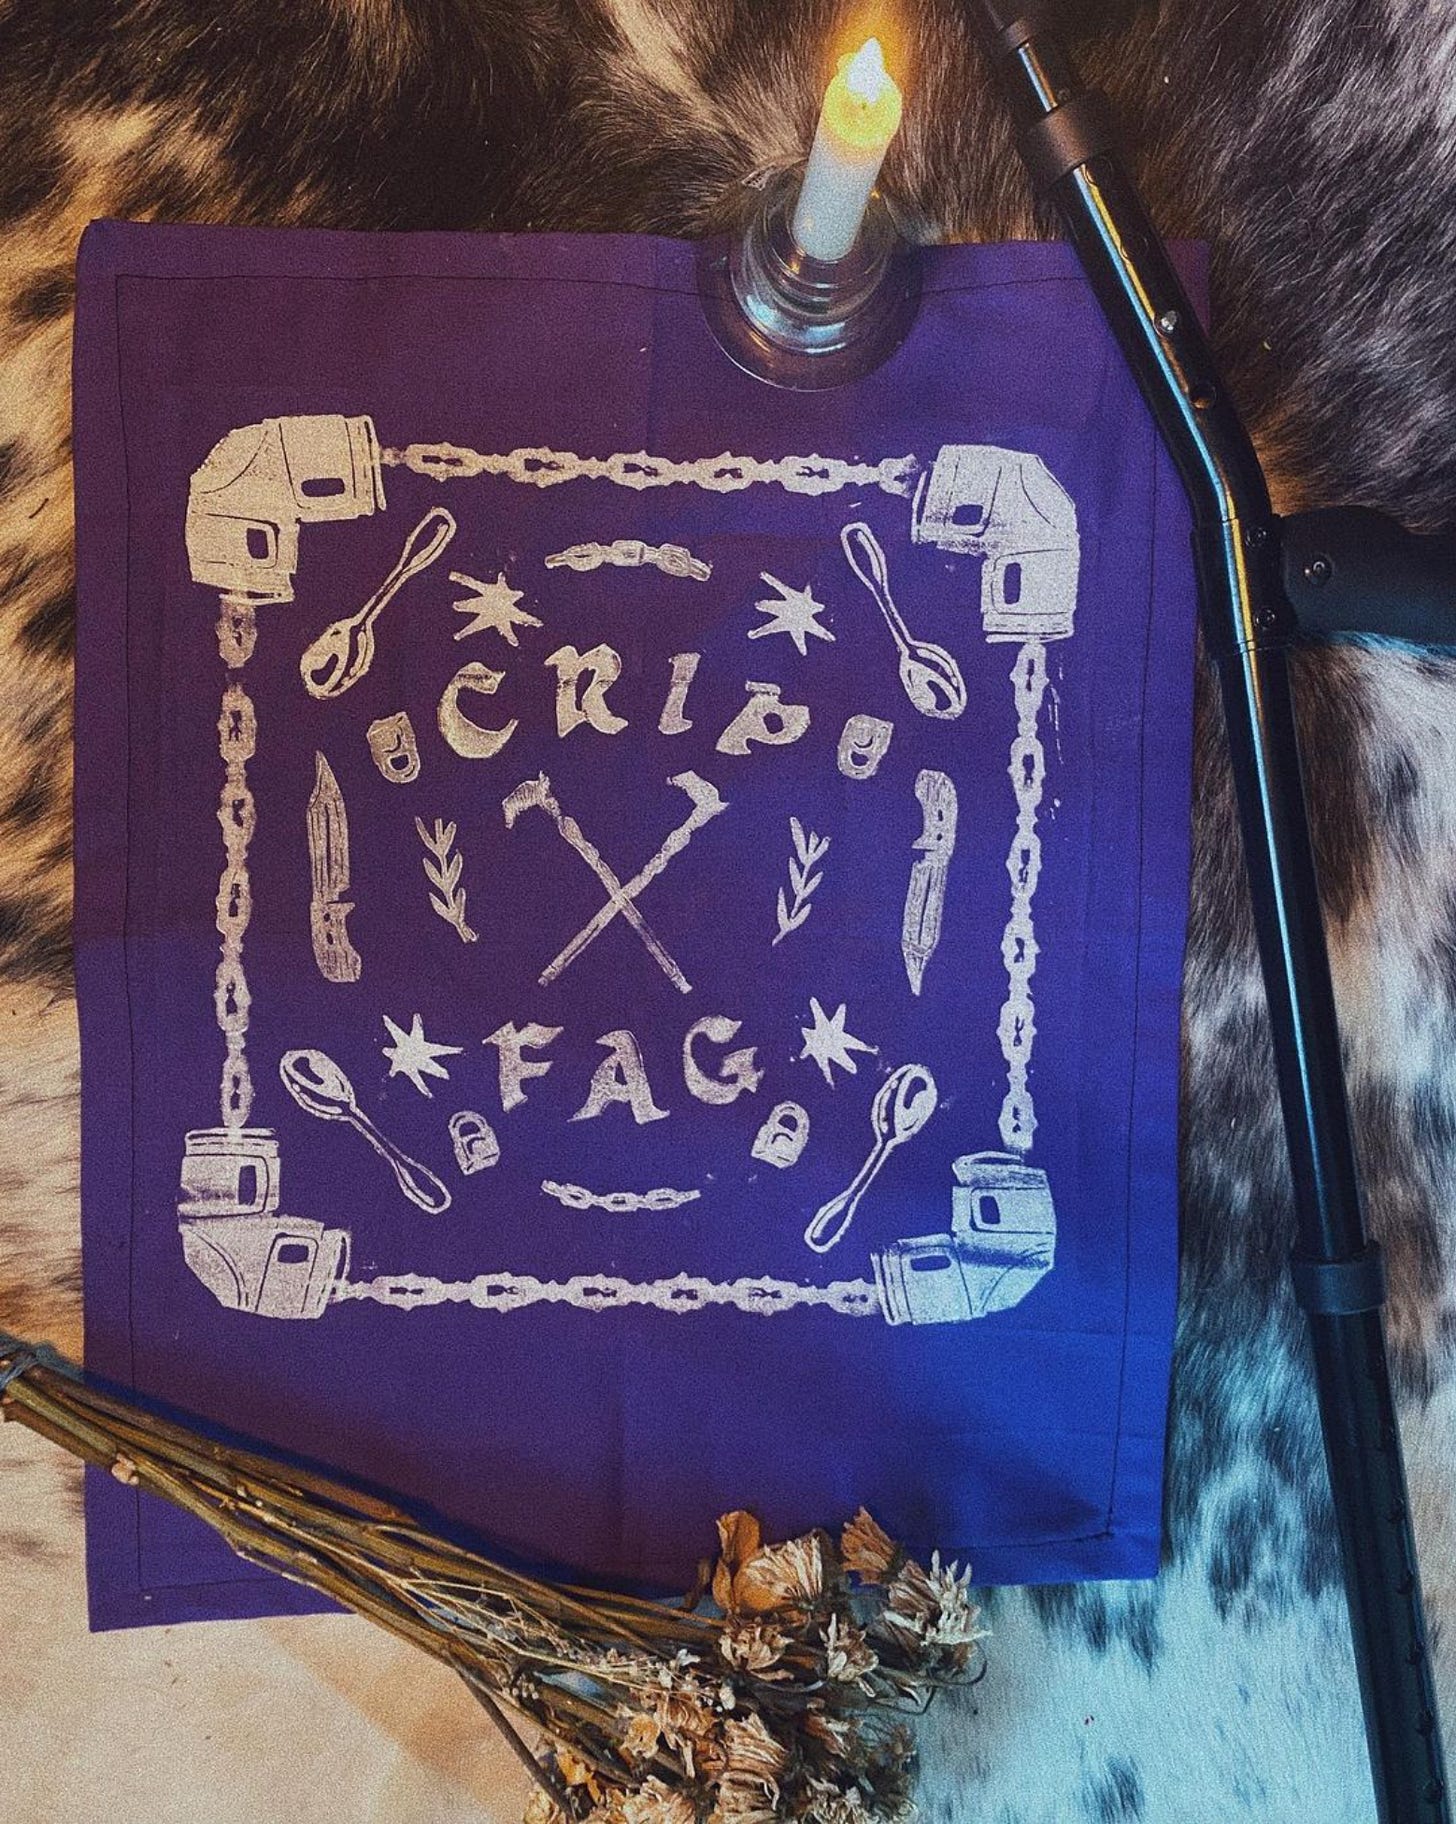 purple “crip fag” hanky or fabric hanging, laying flat on a cowhide surrounded by a taper candle, dried flowers, and a forearm crutch. the design on the hanky has a centre piece of two crossed derby-handle canes, framed by two sprigs of leaves, and the words “crip fag” above and below. Around the outside of the centre are stamps of pocket knives, padlocks, spoons, and chains. The border of the design is made of a chain pattern, with a knee/elbow brace in each corner.